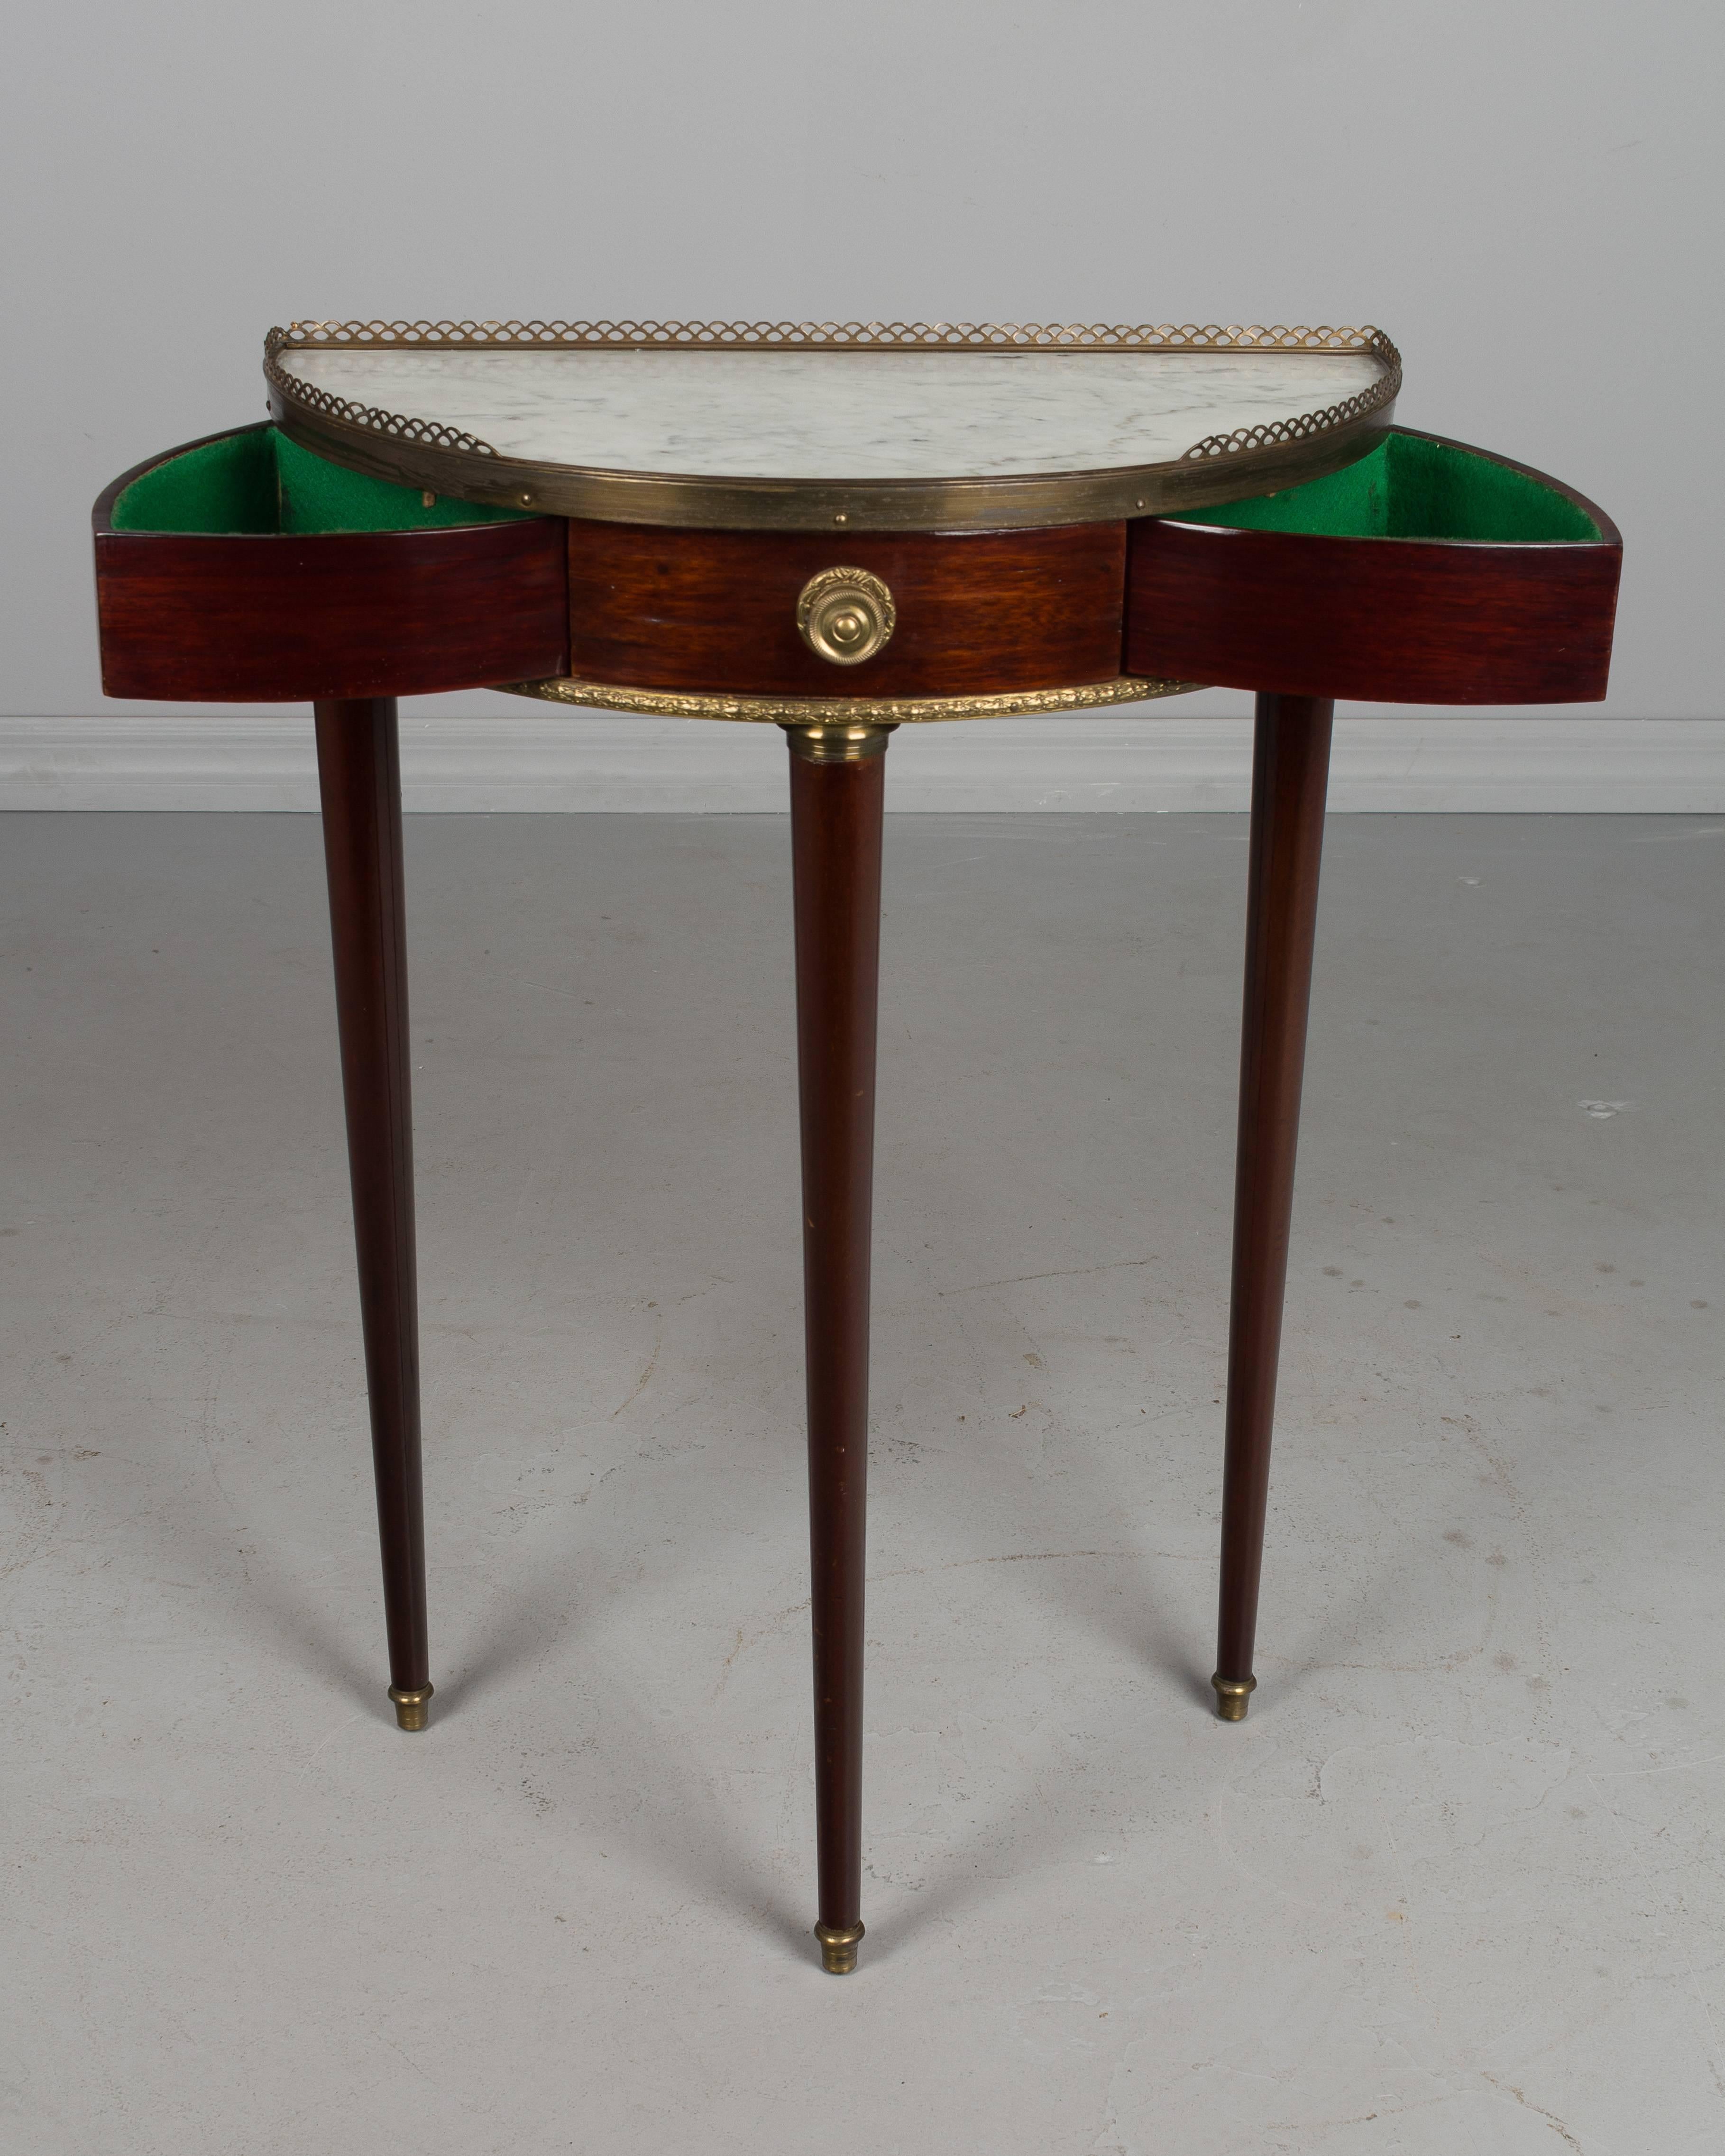 A small French mahogany demilune console table with white marble top and brass gallery. Two felt lined drawers open by spring mechanism when the centre knob is pulled. An unusual and clever design. French Polish and in great condition.